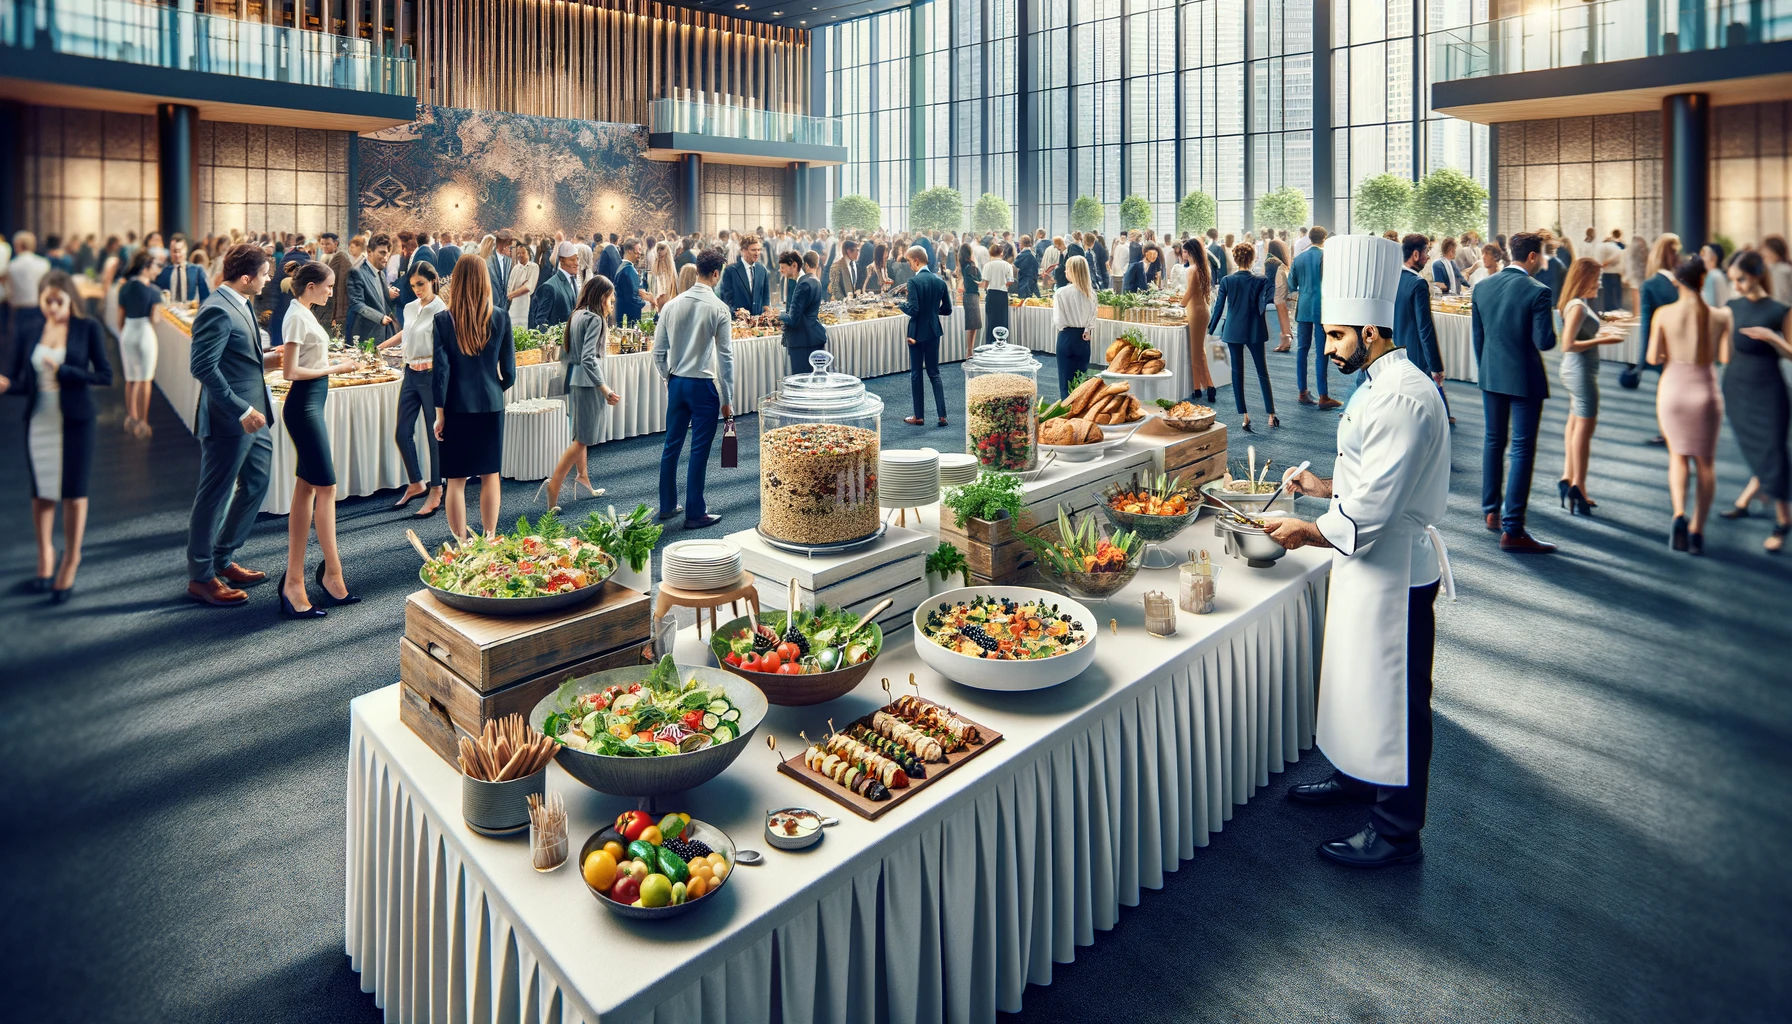 Healthy Eating for Corporate Events: More Energy, Less Stress